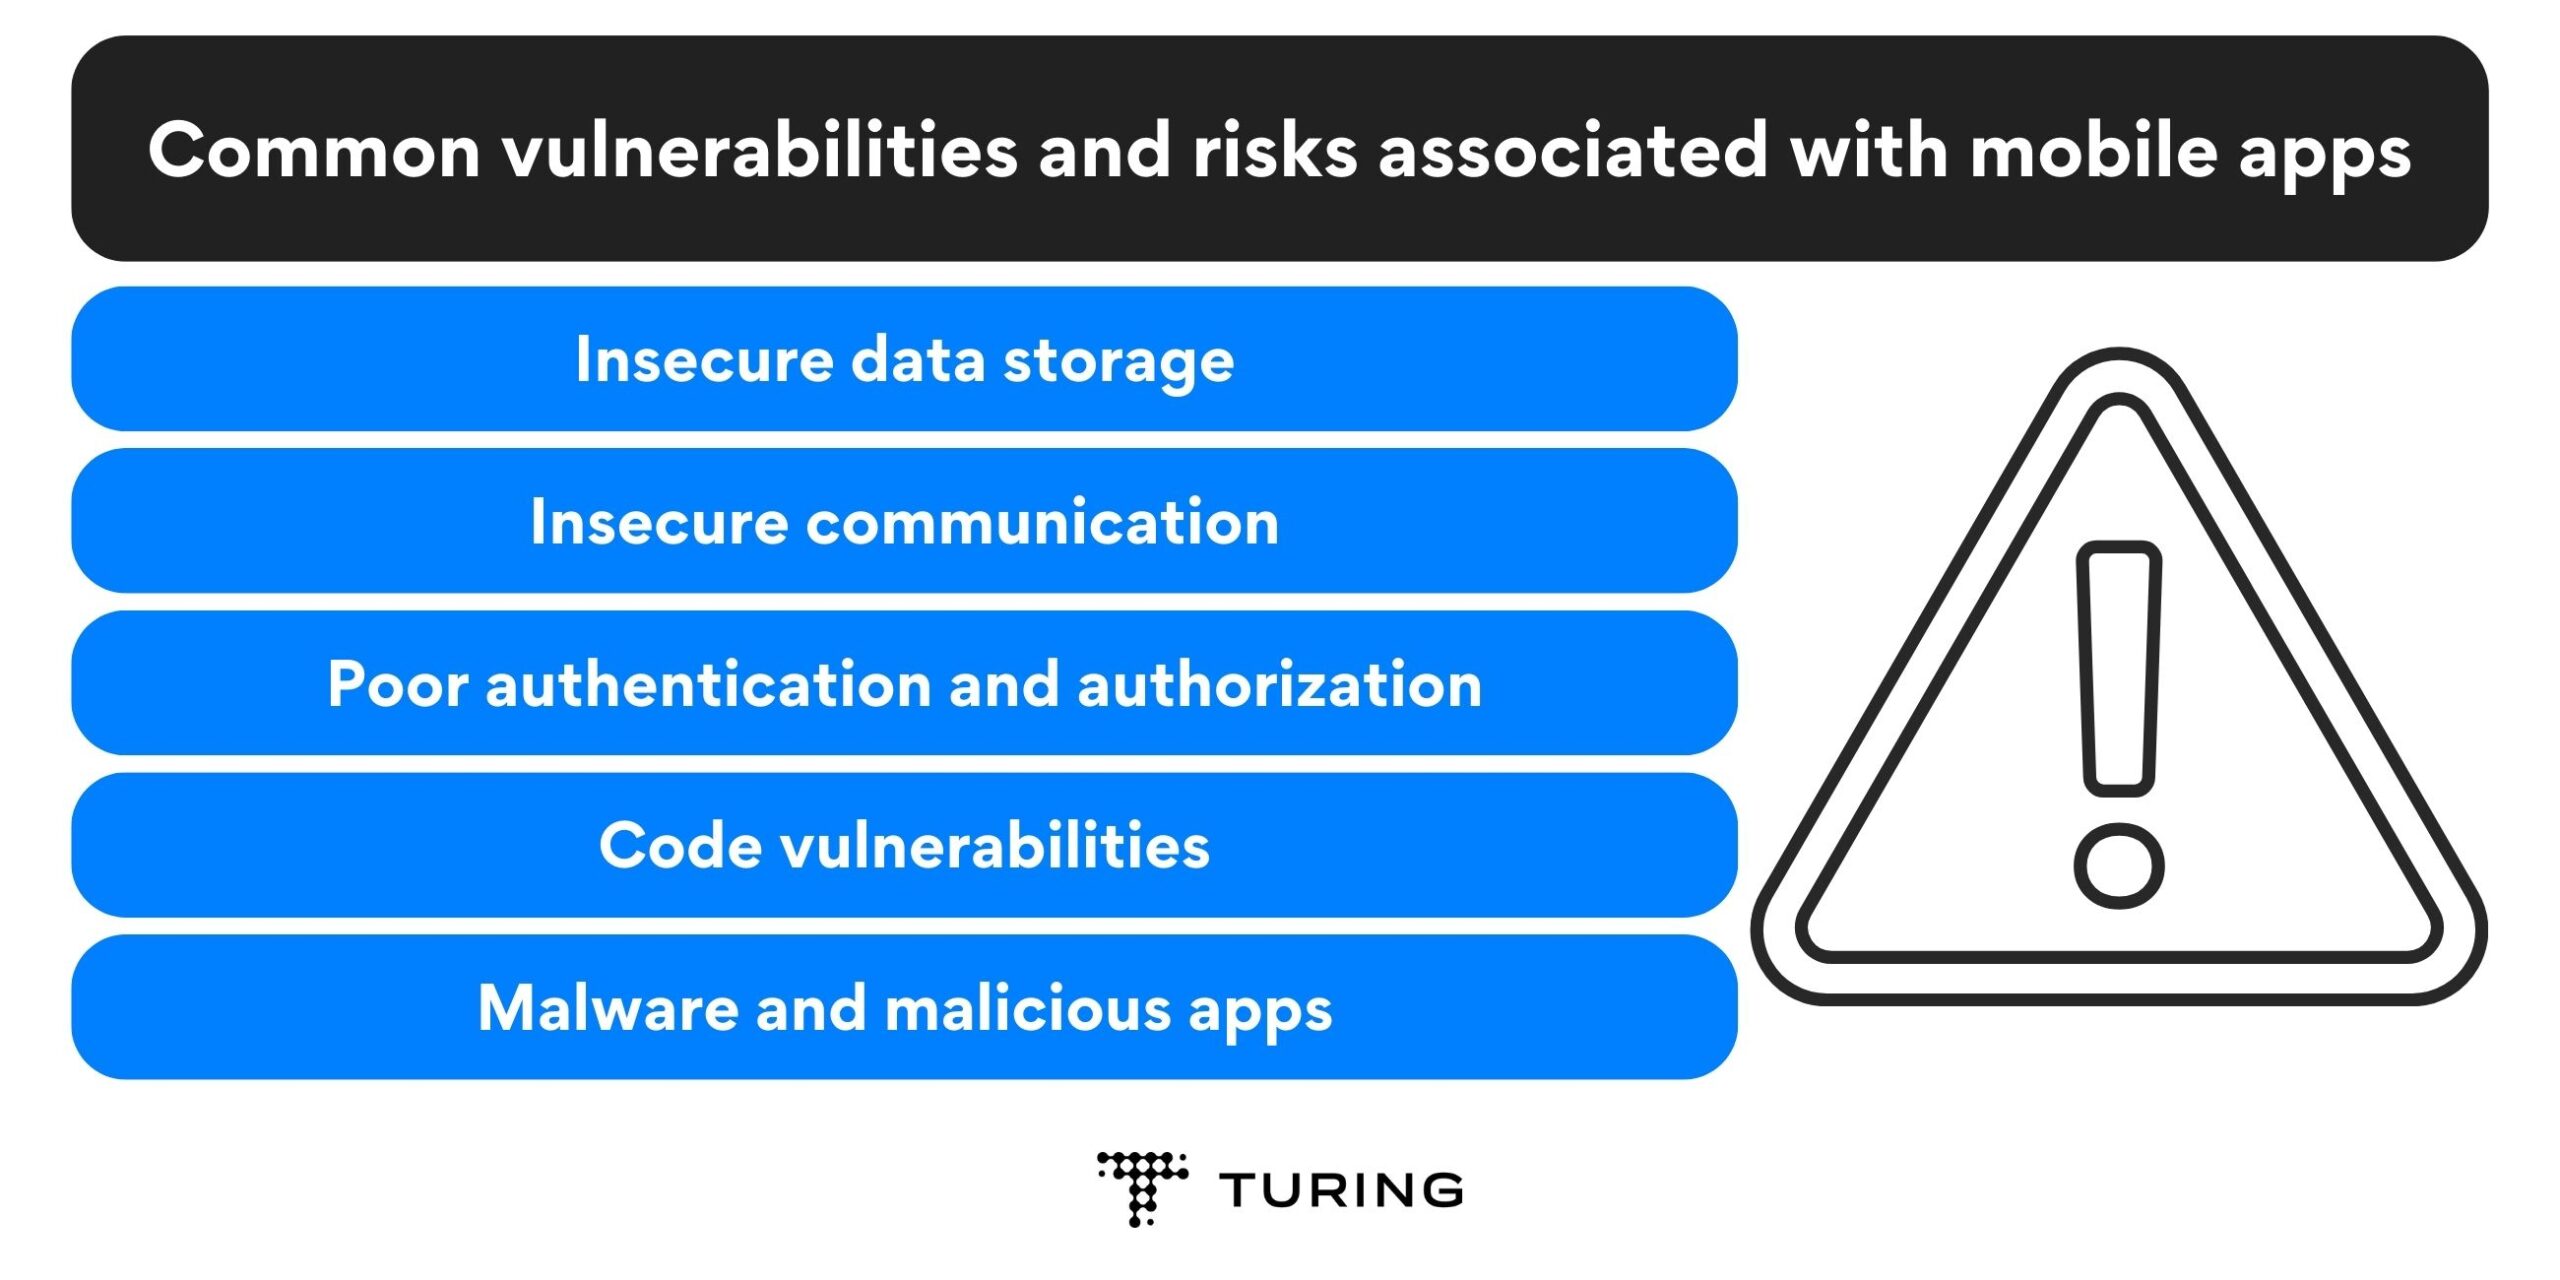 Common vulnerabilities and risks associated with mobile apps